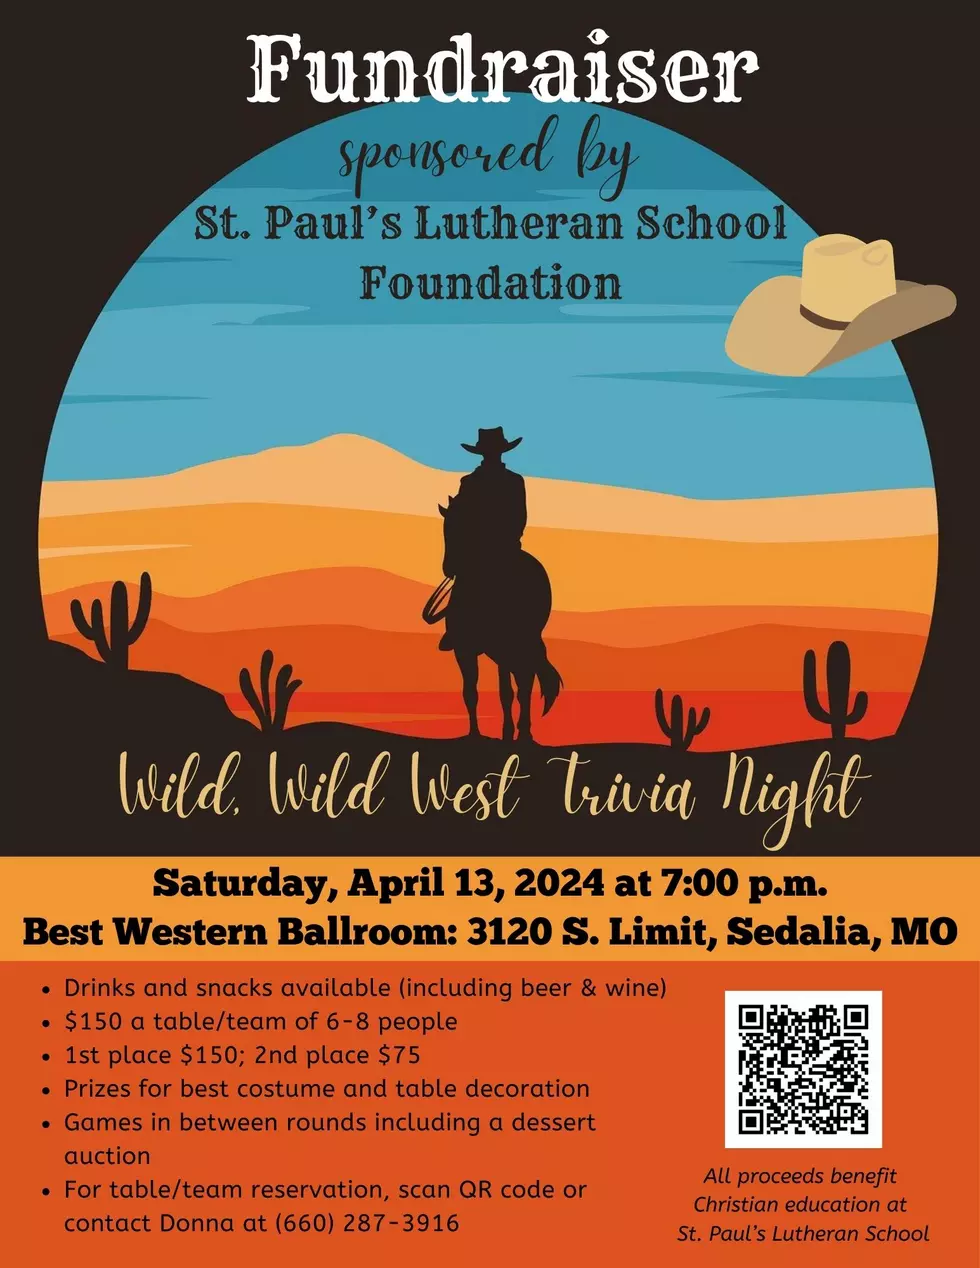 Trivia Night Fundraiser for St. Paul Lutheran Planned